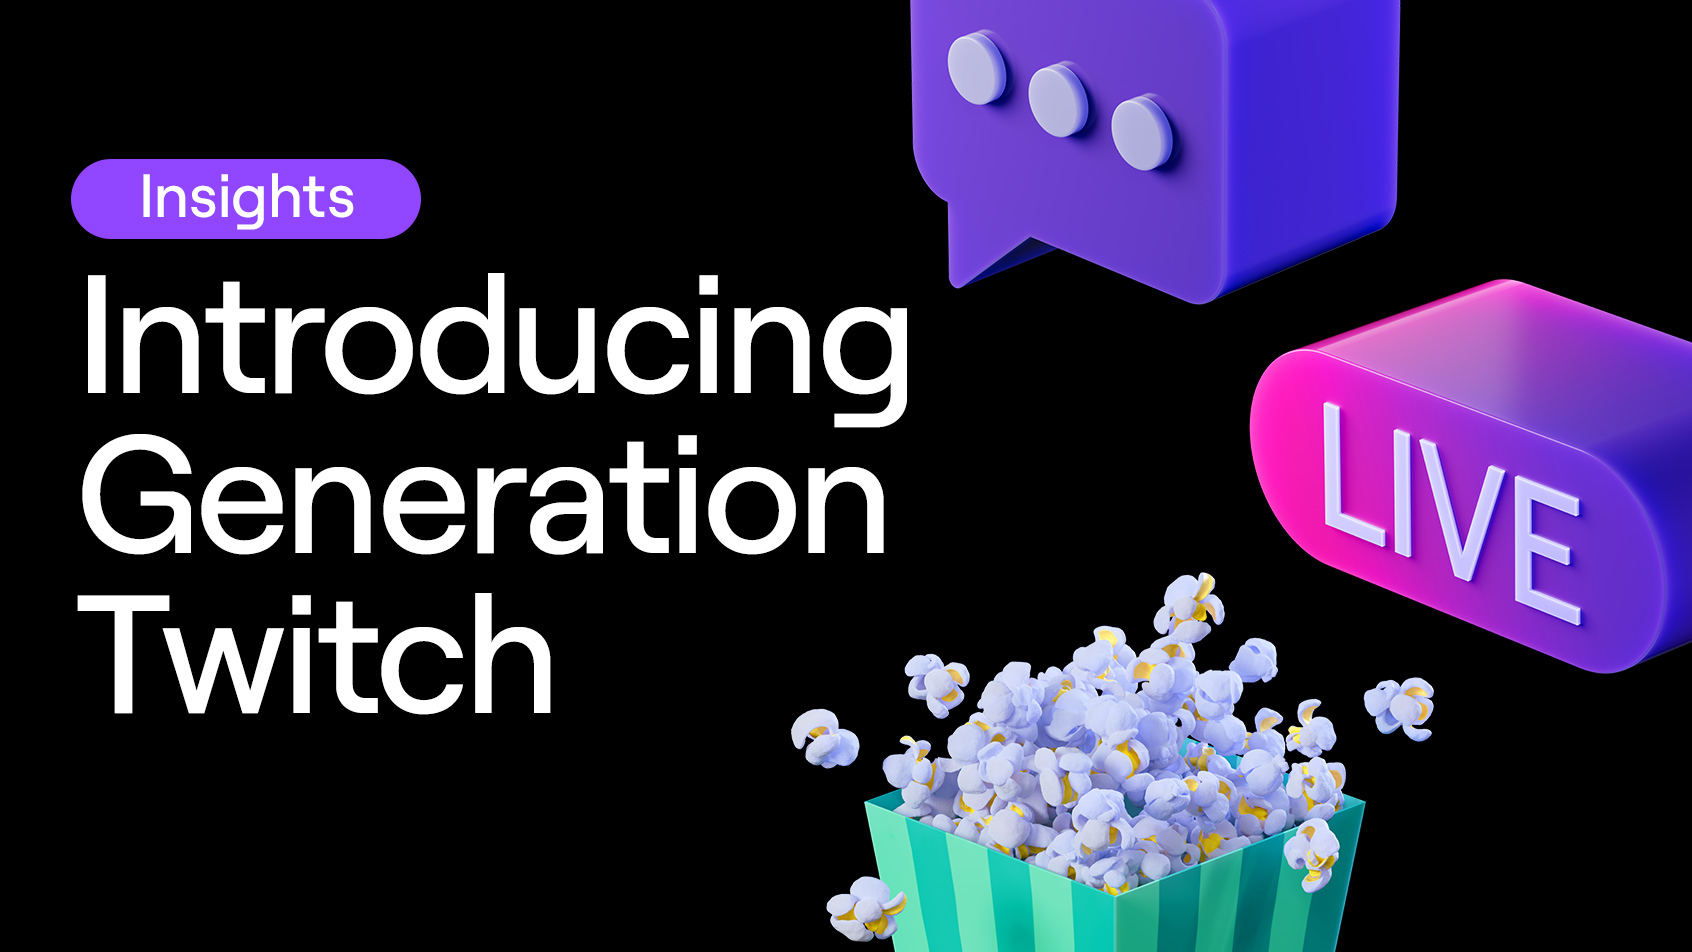 What marketers should know about engaging Generation Twitch